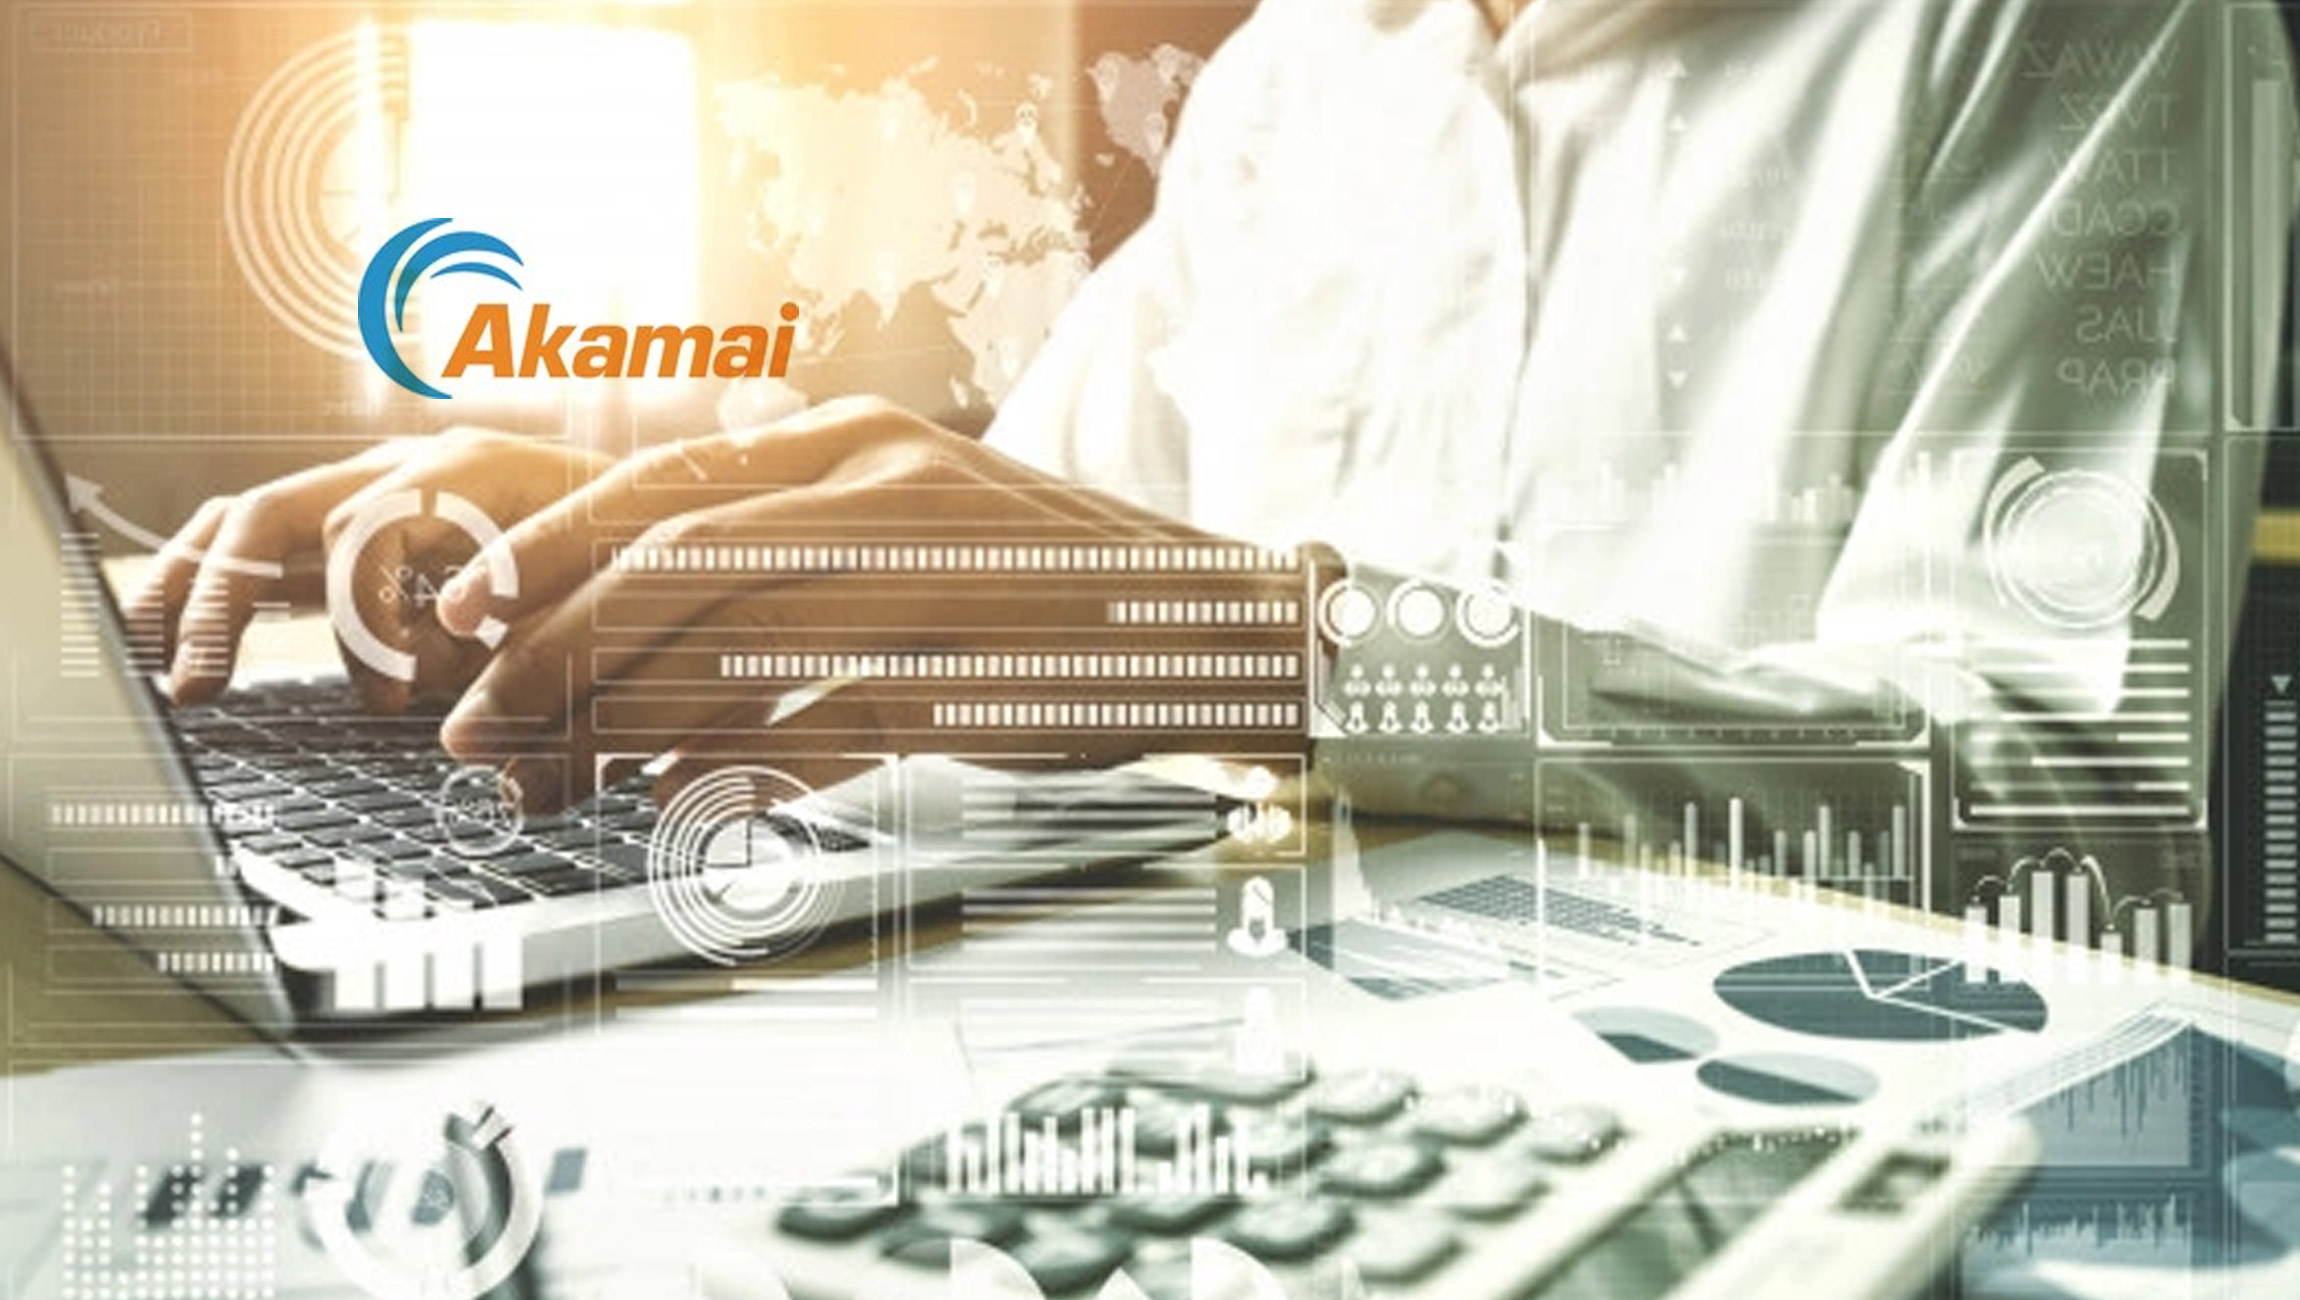 Akamai Launches First NFT Artwork Dynamically Fueled by the Internet